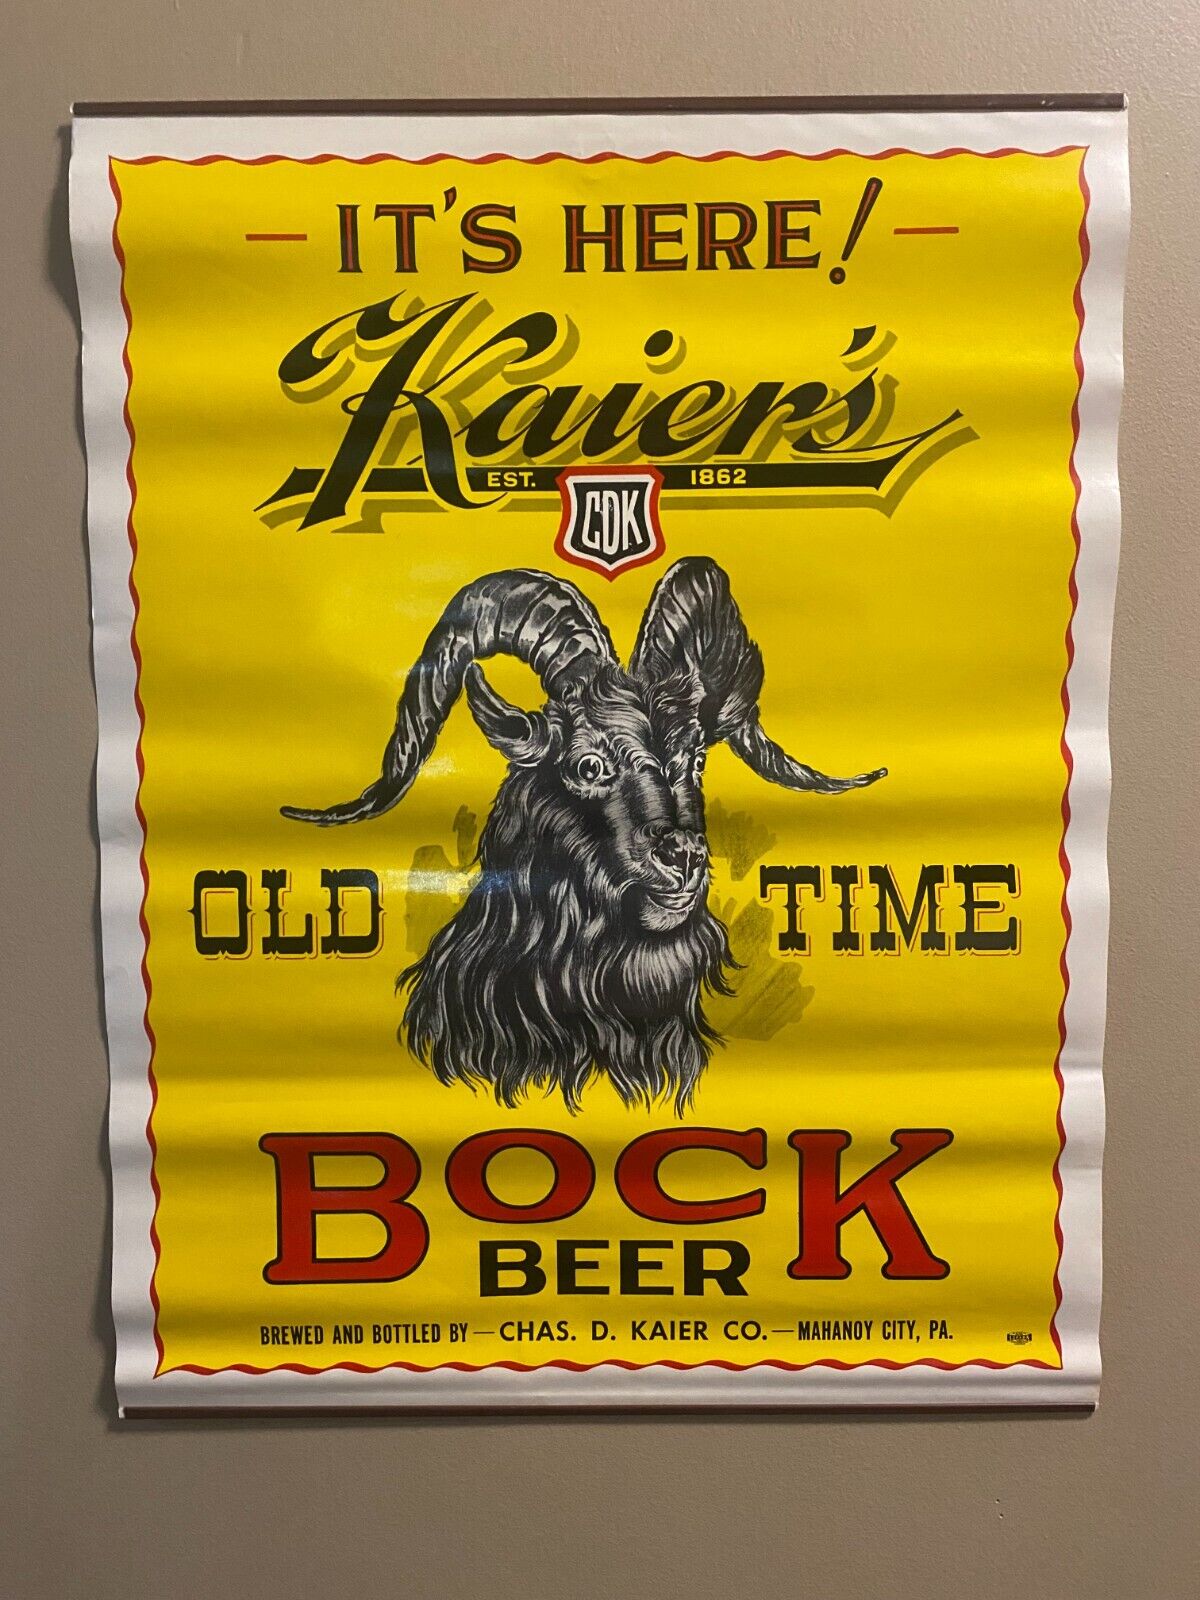 Kaier's Old Time Bock Beer- Vintage Poster KAIER'S